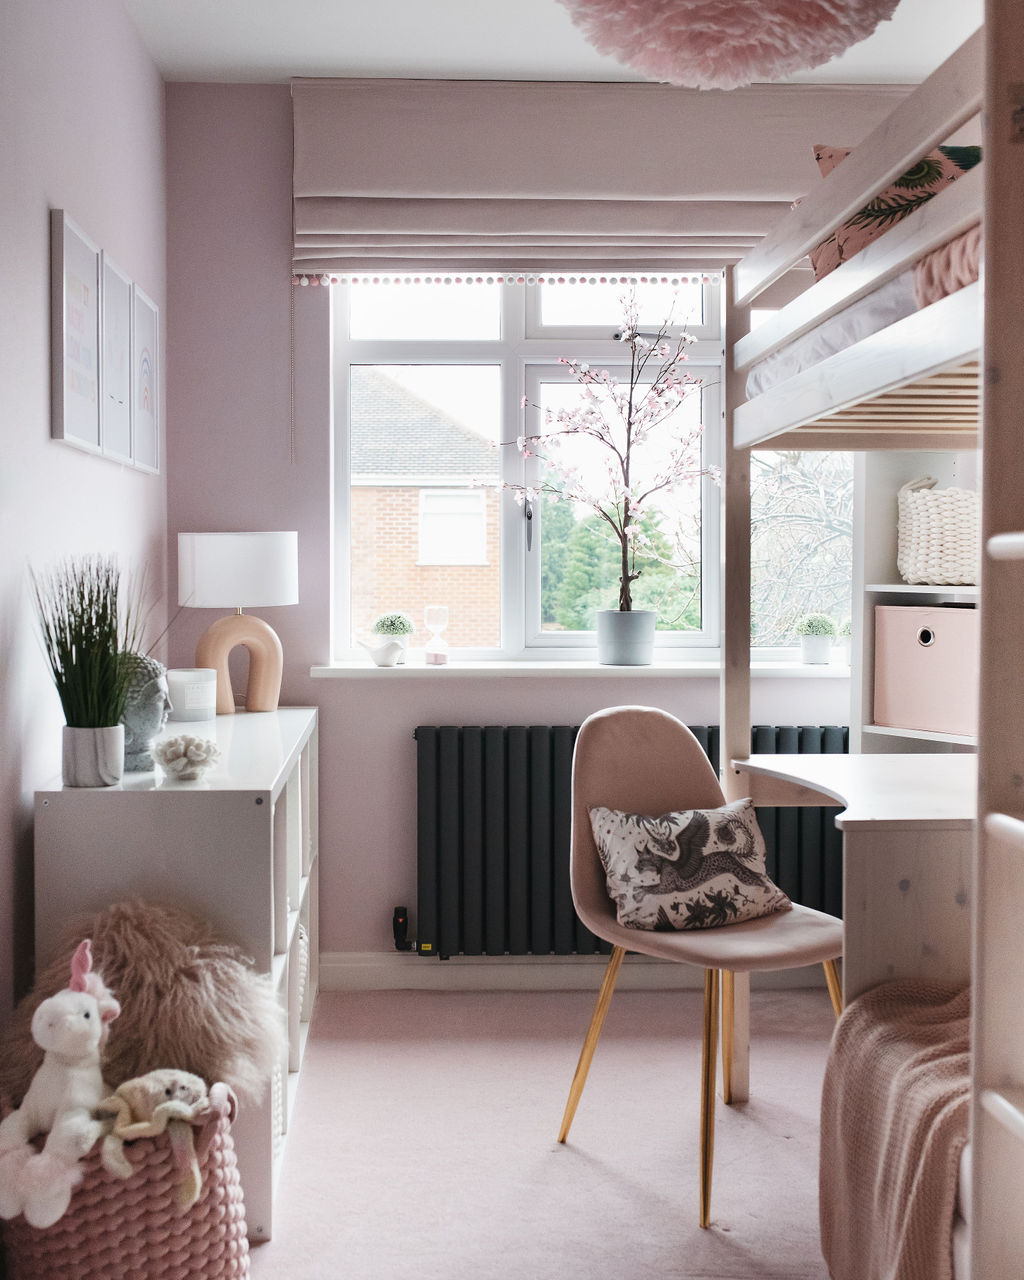 interior of a girls bedroom with pale pink walls and a bunk bed